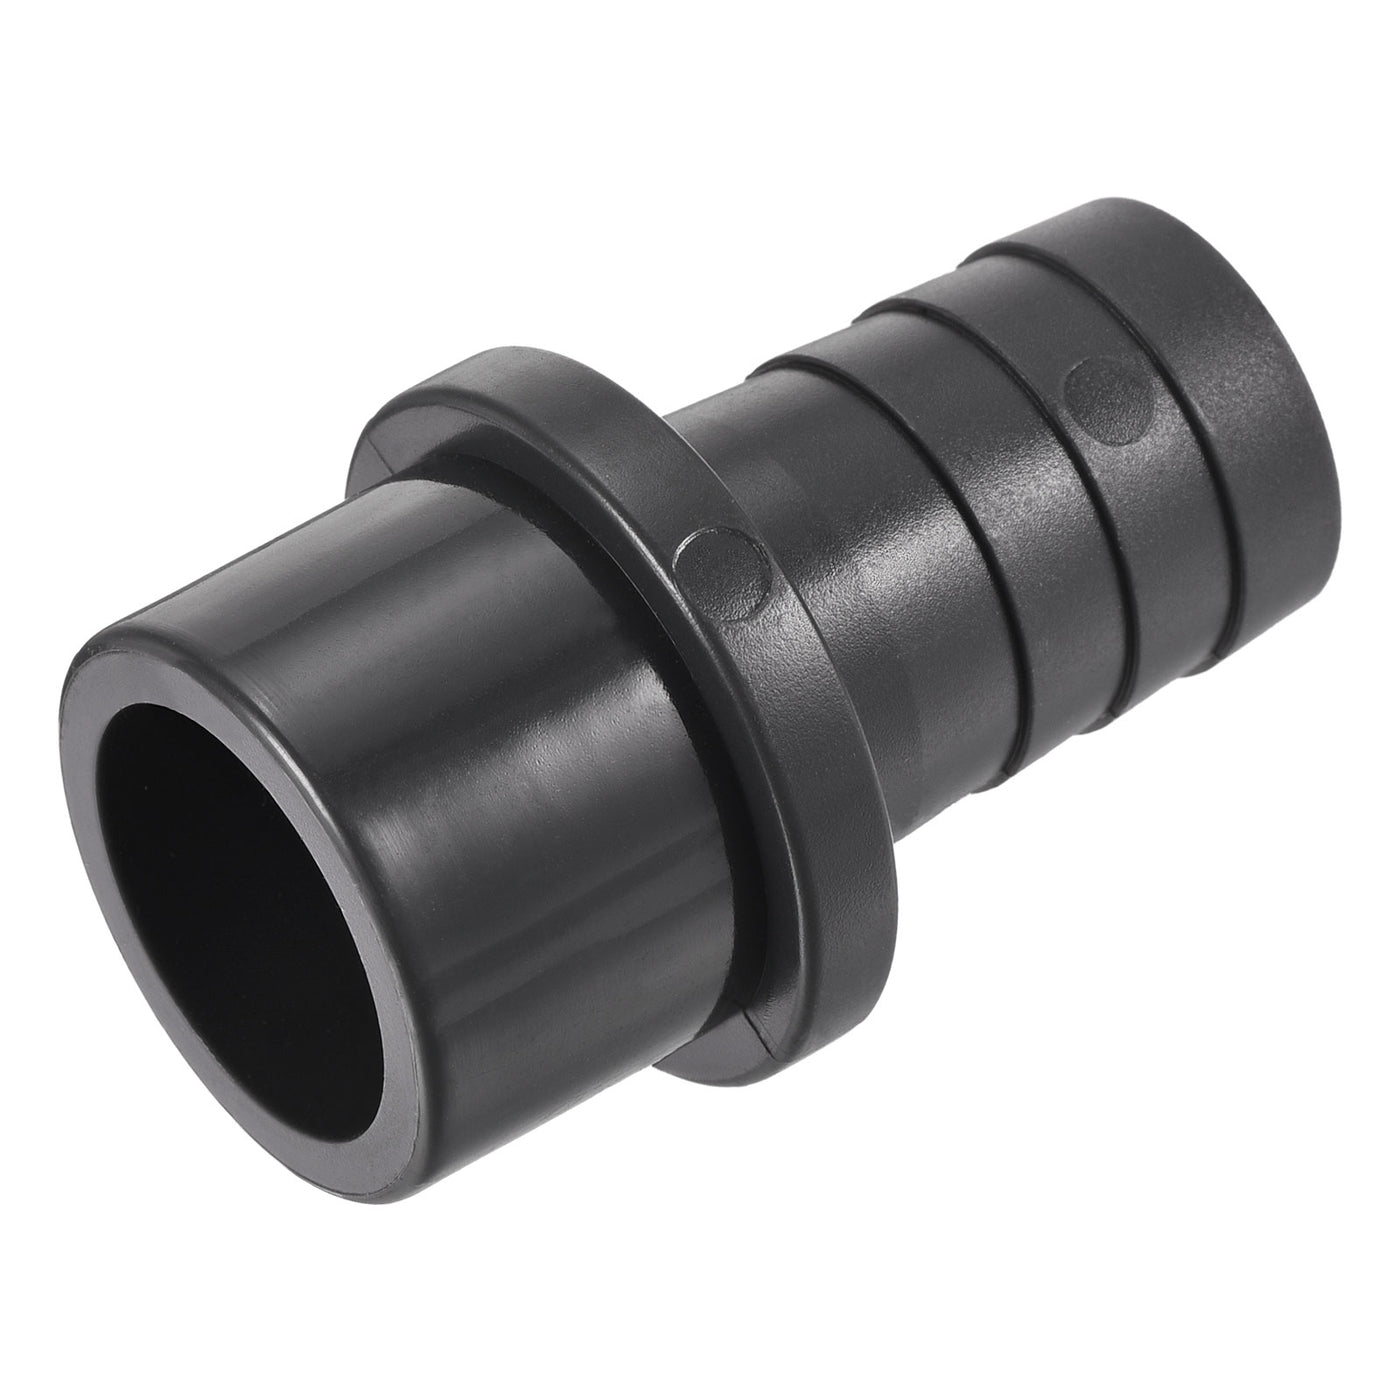 Harfington PVC Pipe Fitting 25mm Barbed x 32mm OD Spigot Straight Hose Connector Black